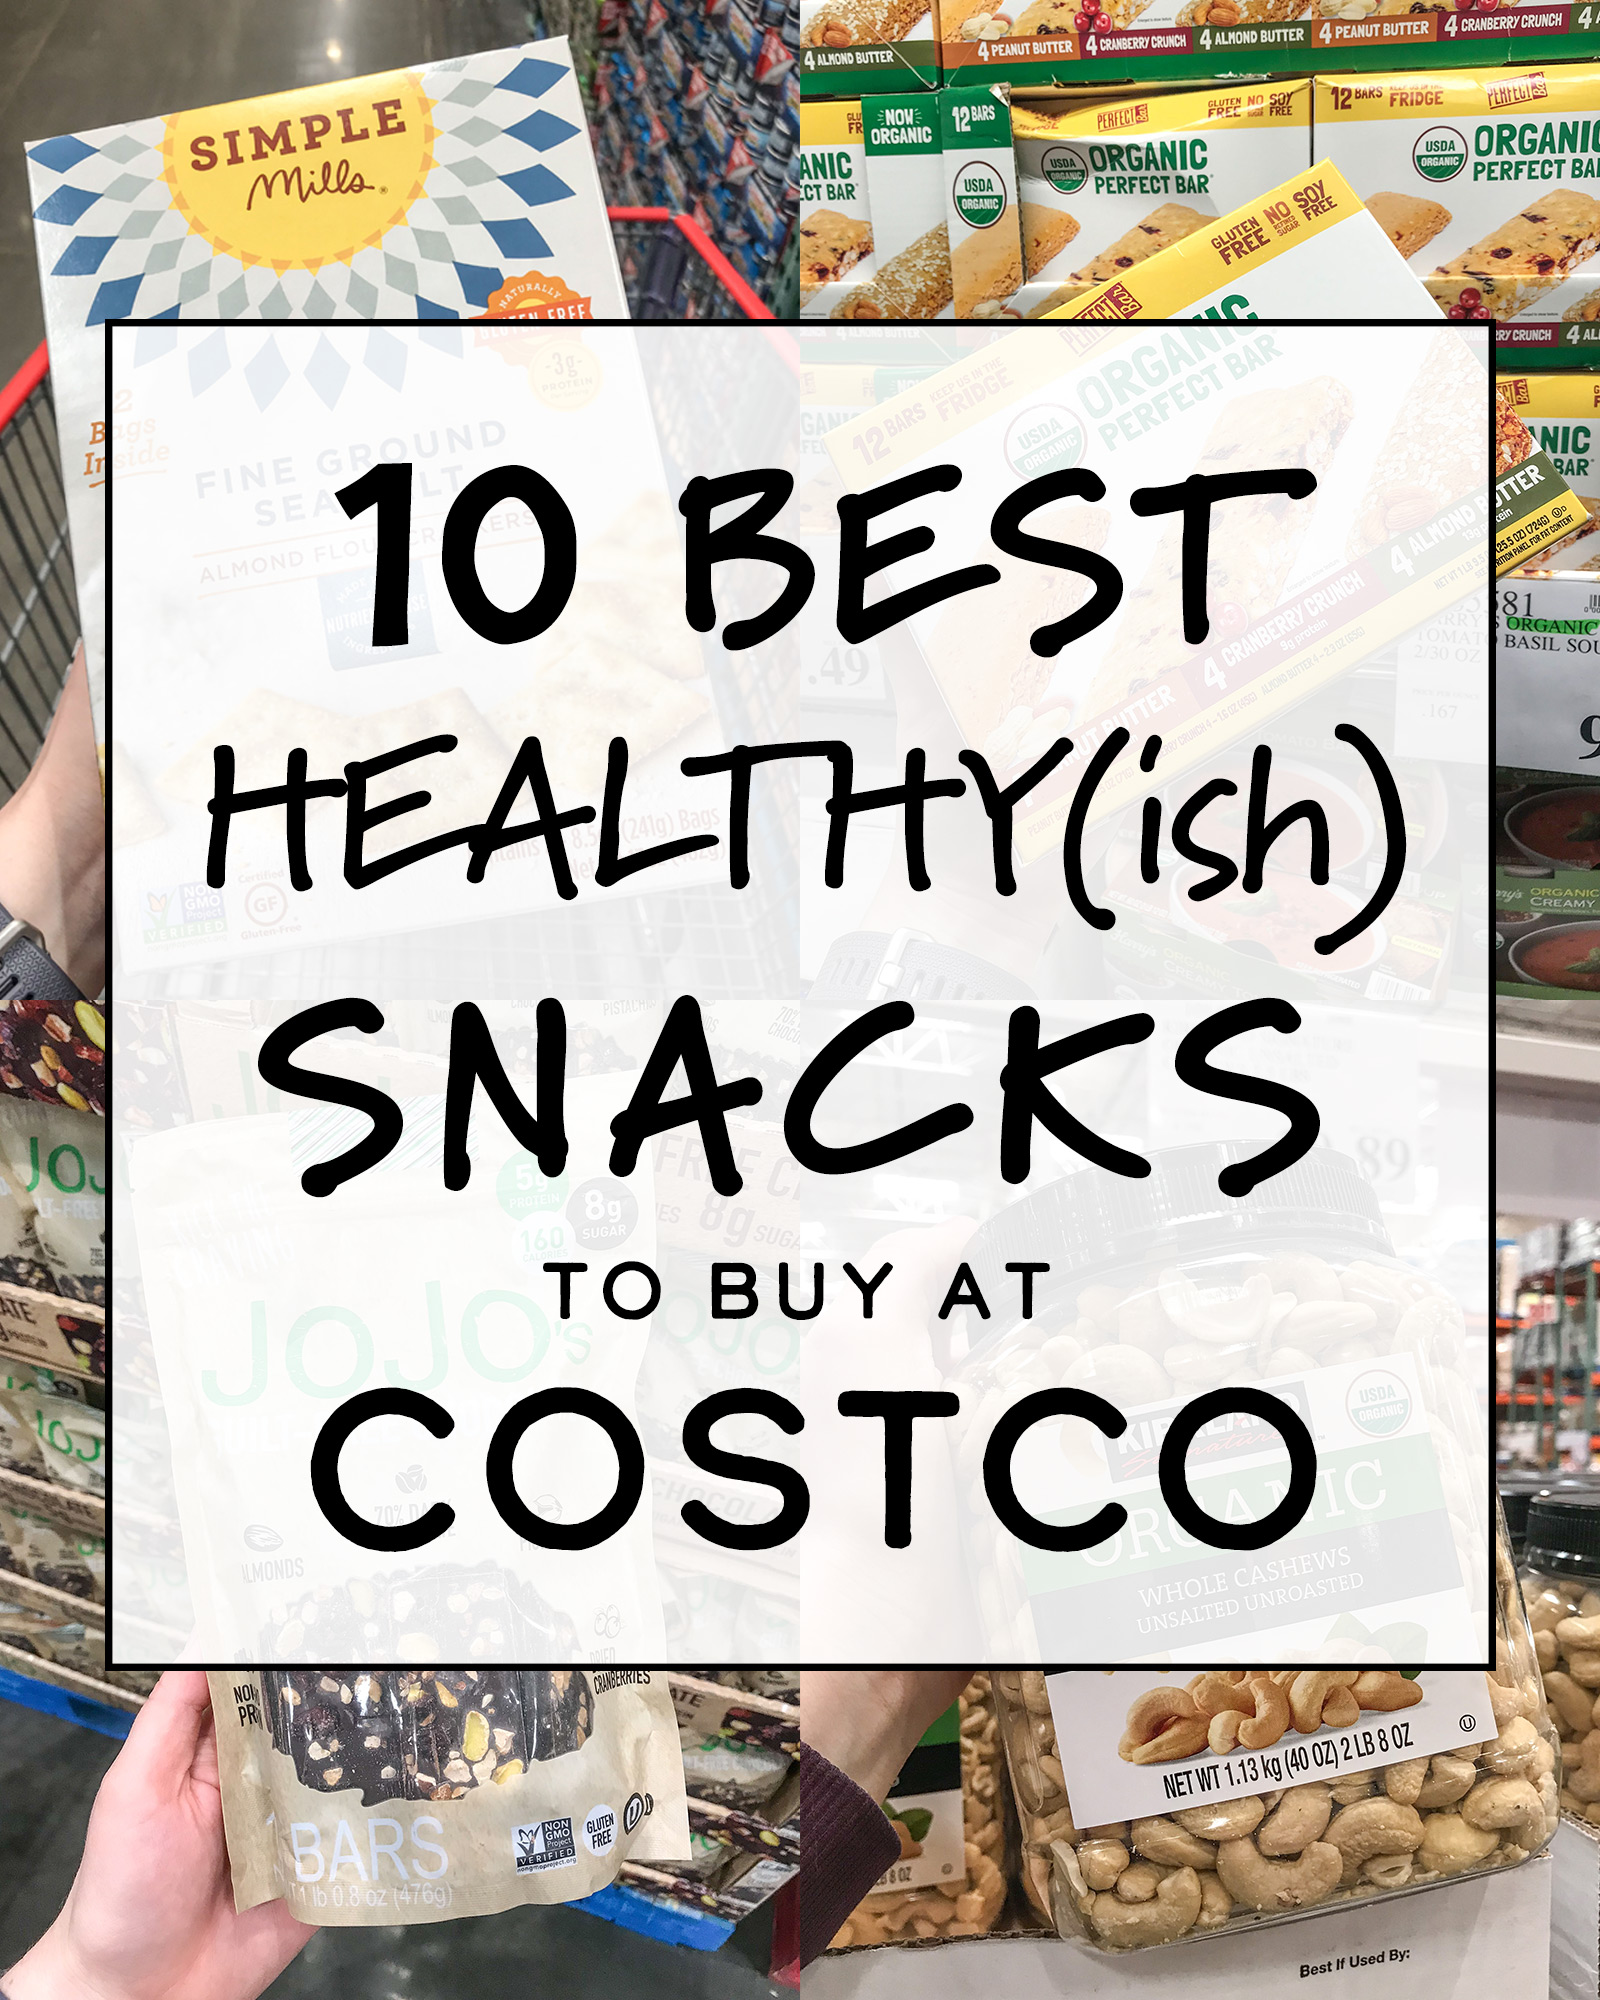 Cover image for the article 10 Best Healthy(ish) Snacks to Buy at Costco